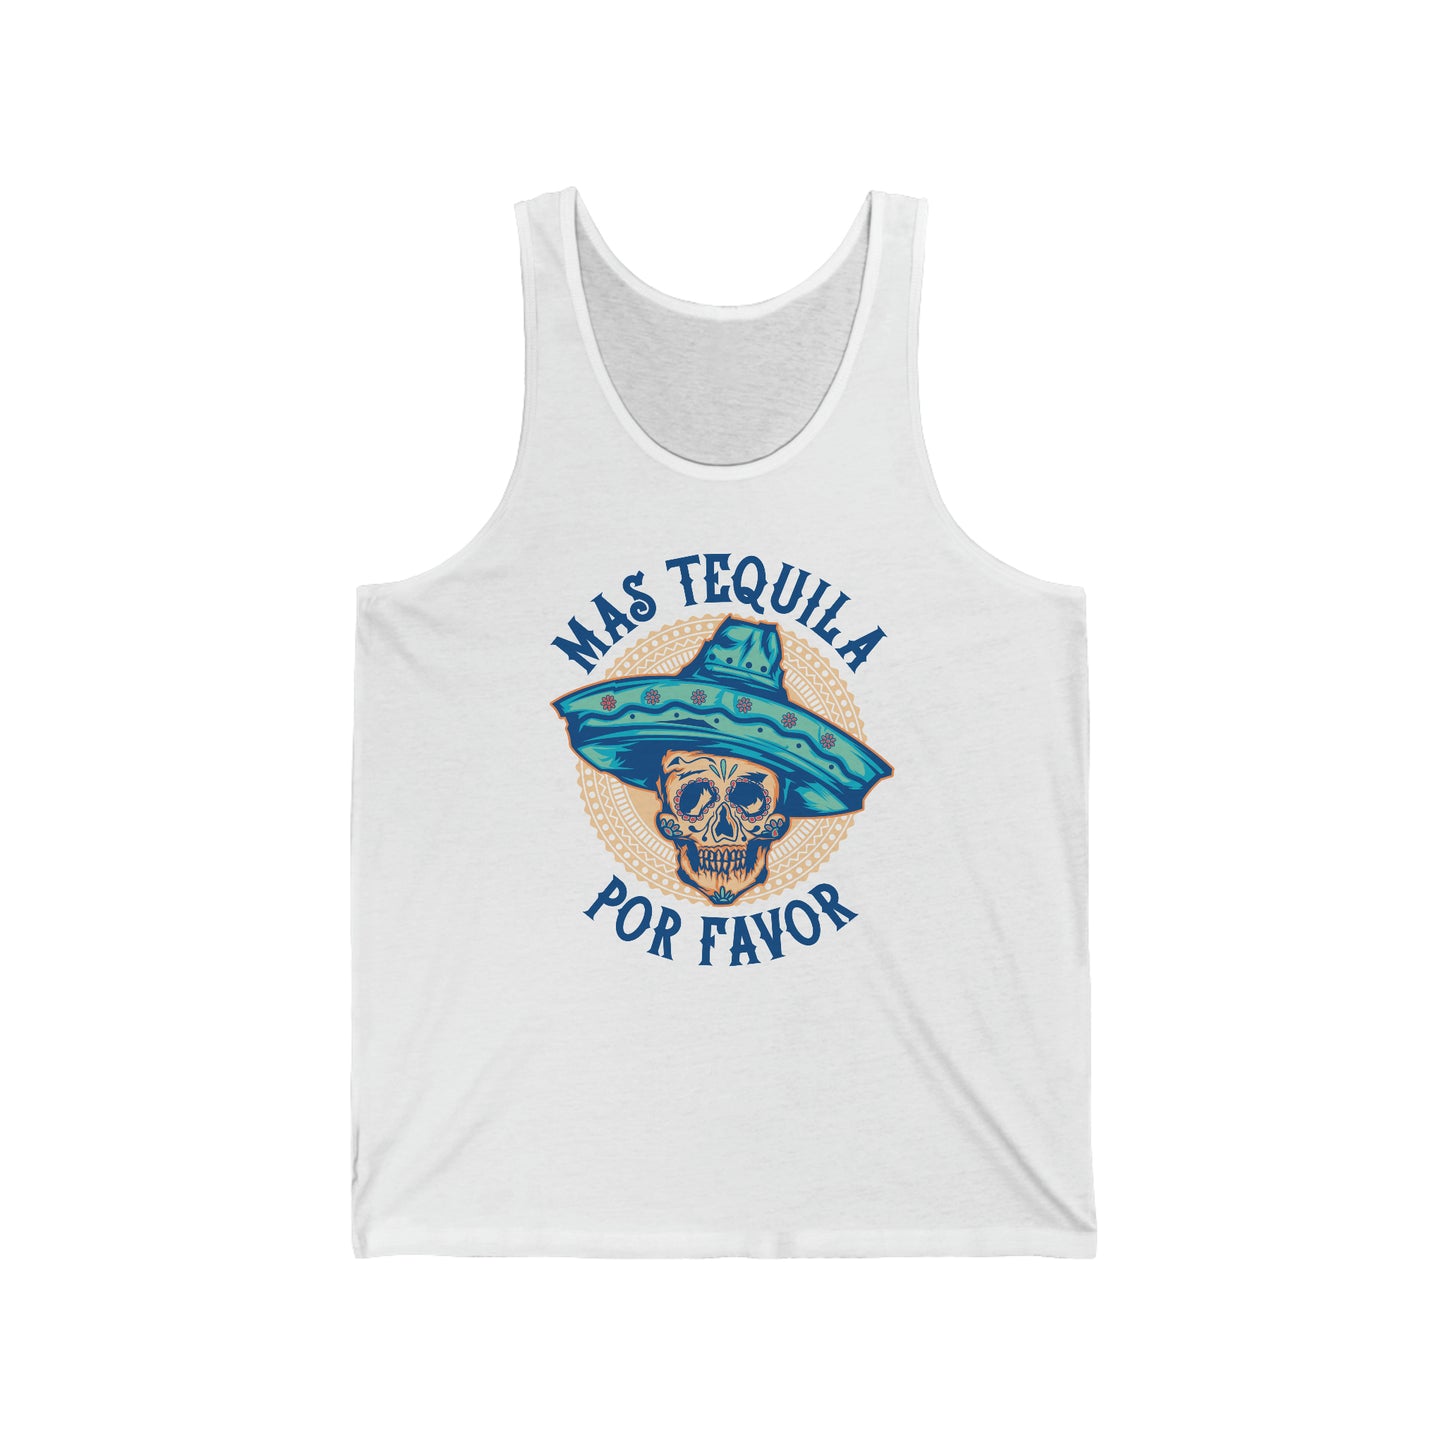 Tequila Tank Top For Cinco De Mayo TShirt For Party Shirt For Funny Tequila Shirt For Party Gift For Alcohol Gift For Summer Tank